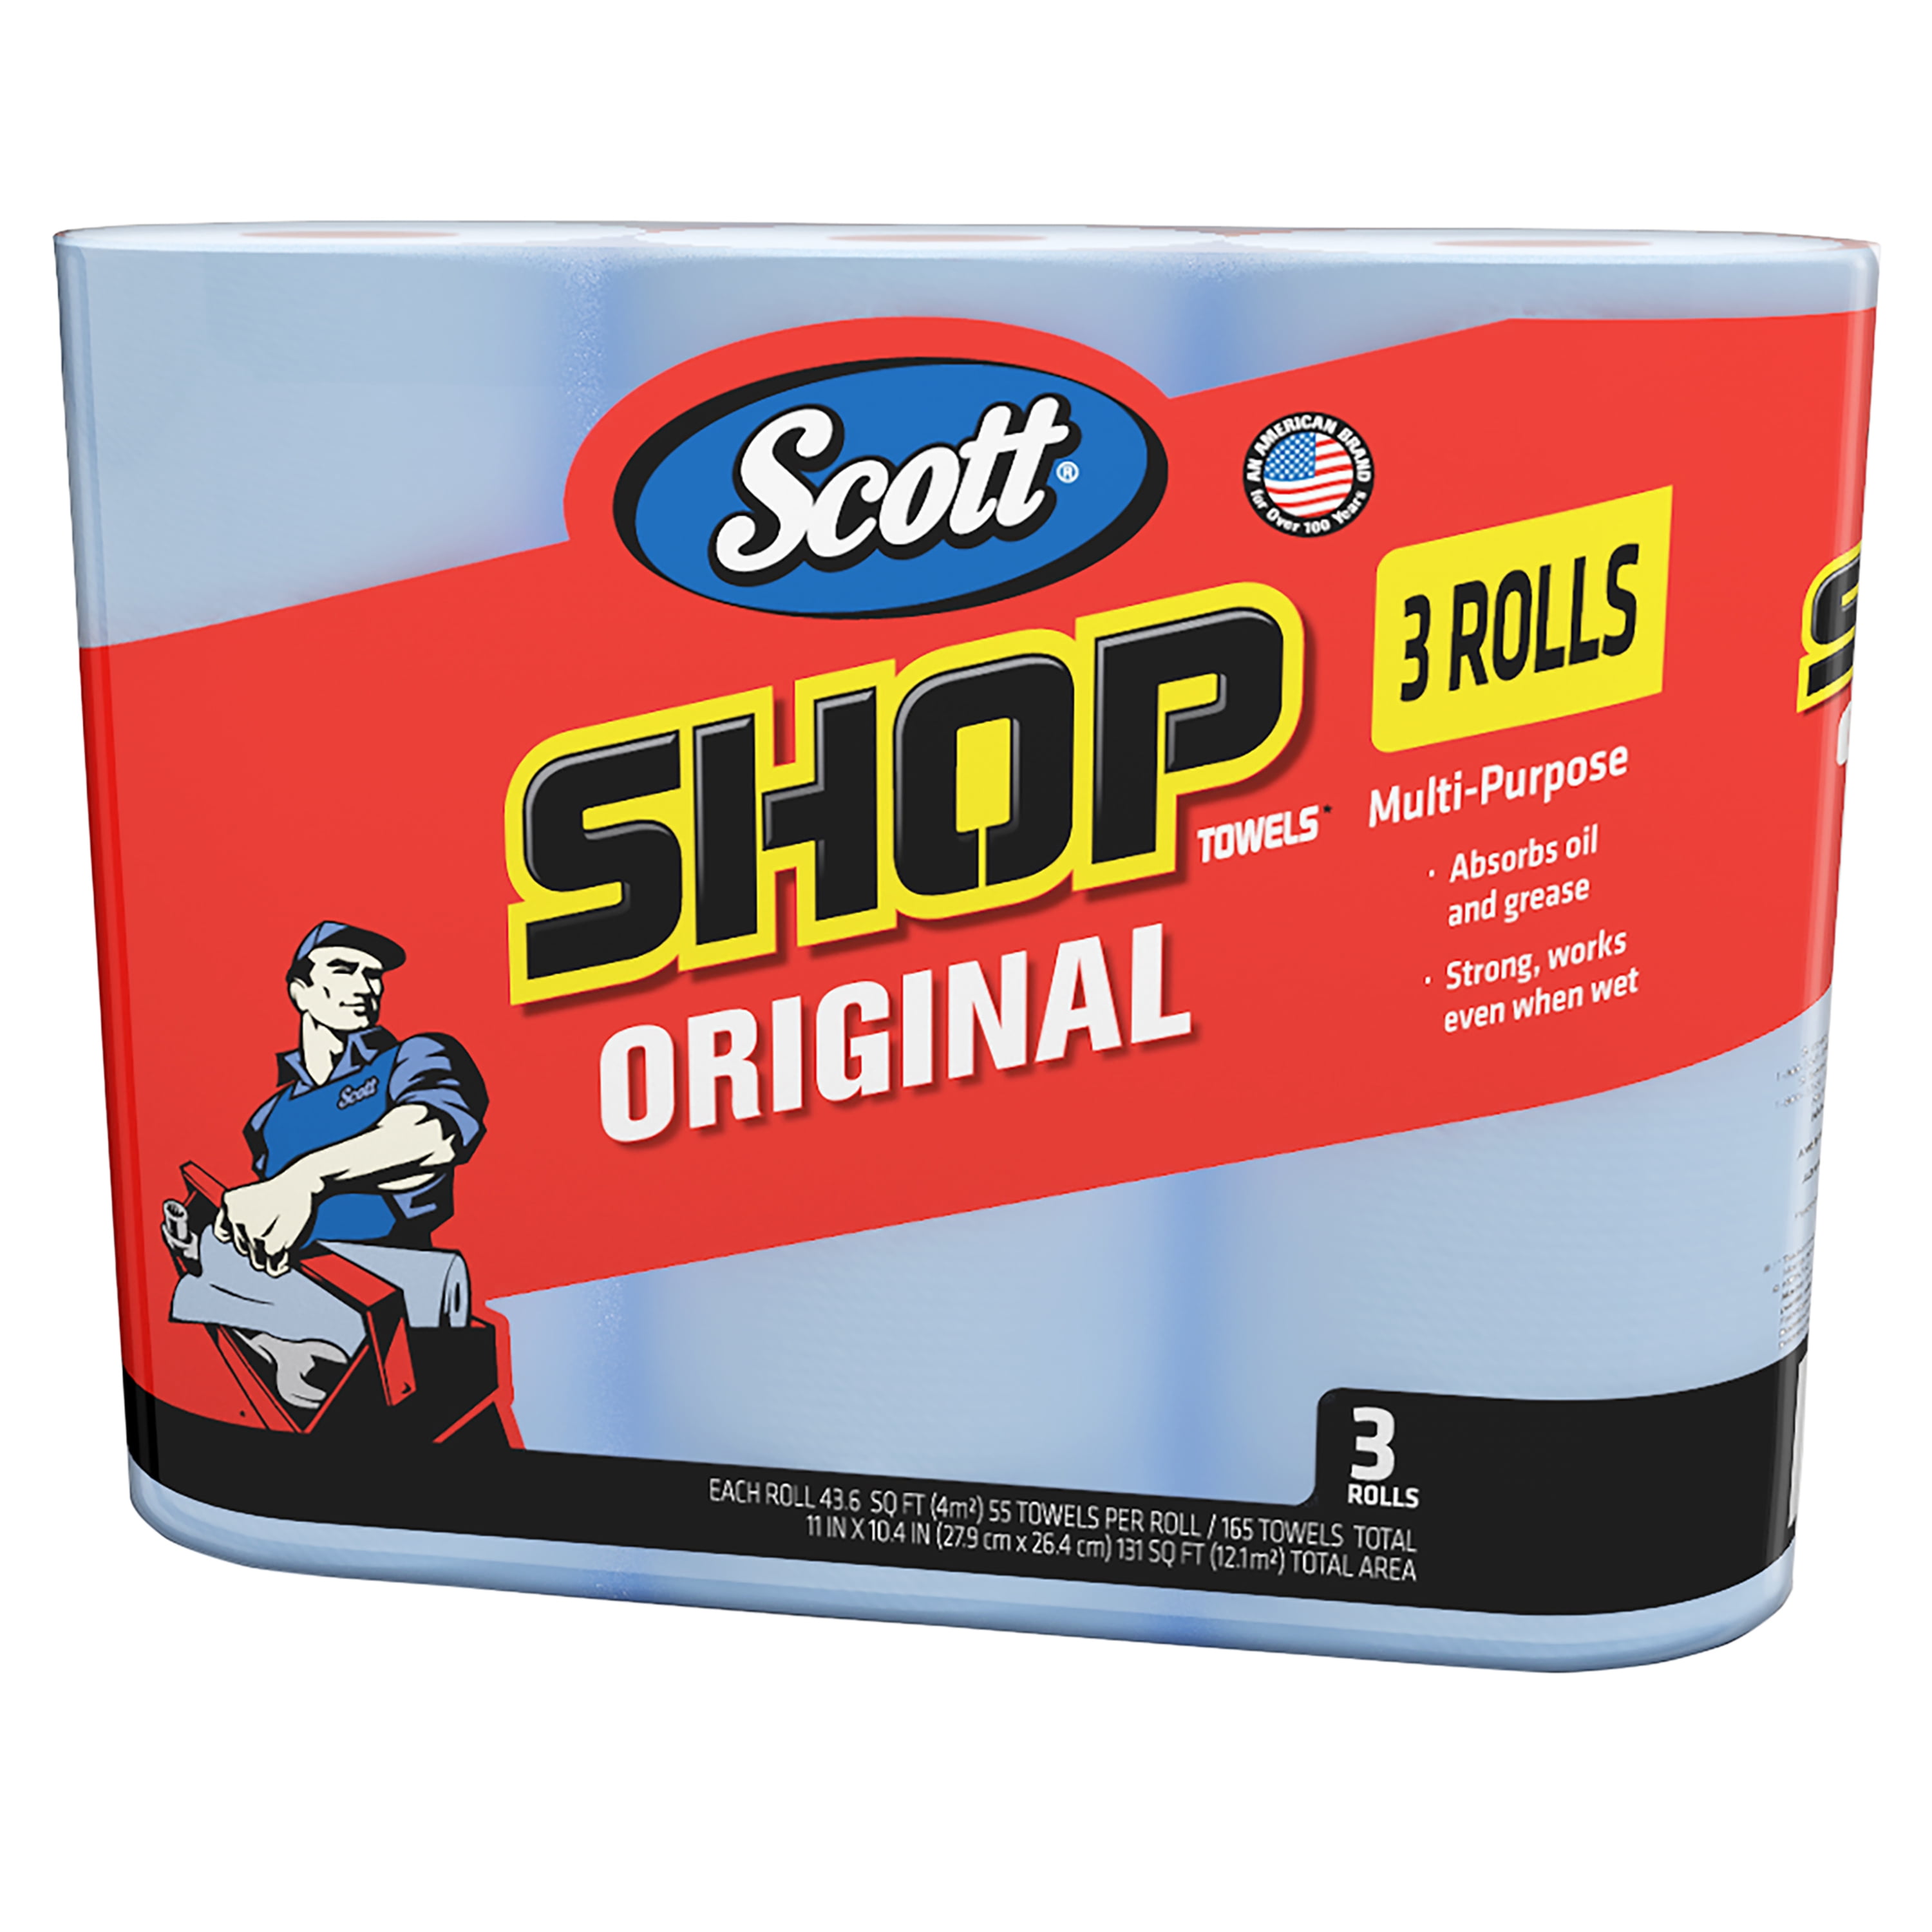 Scott Multi Purpose Shop Towels for Hands and Cleanup Jobs Pack of 10 Rolls 